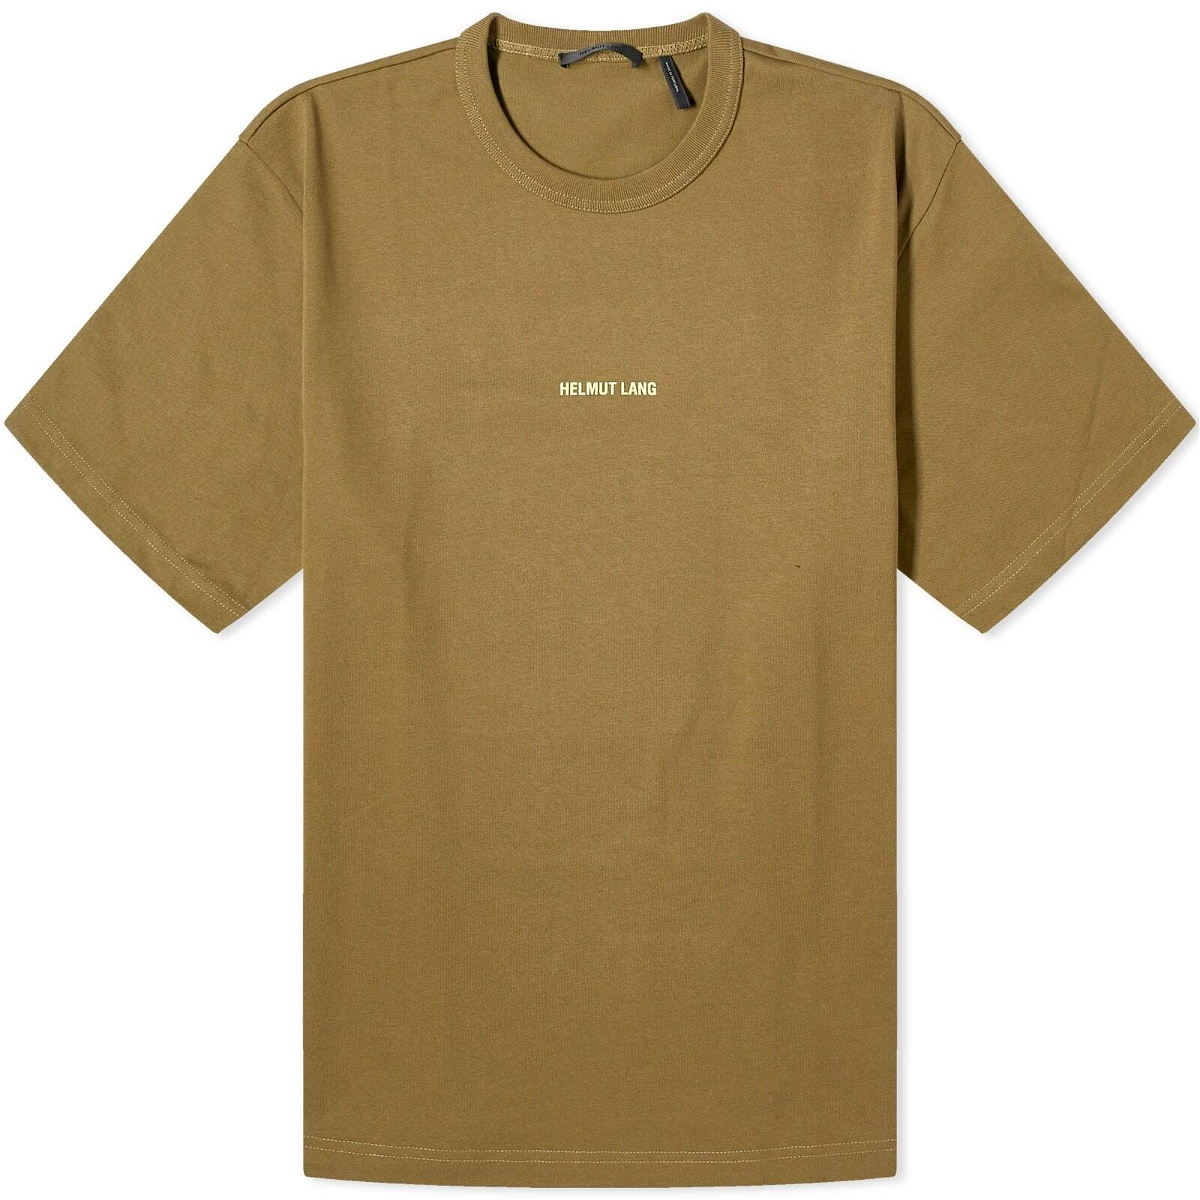 Photo: Helmut Lang Men's Outer Space T-Shirt in Olive